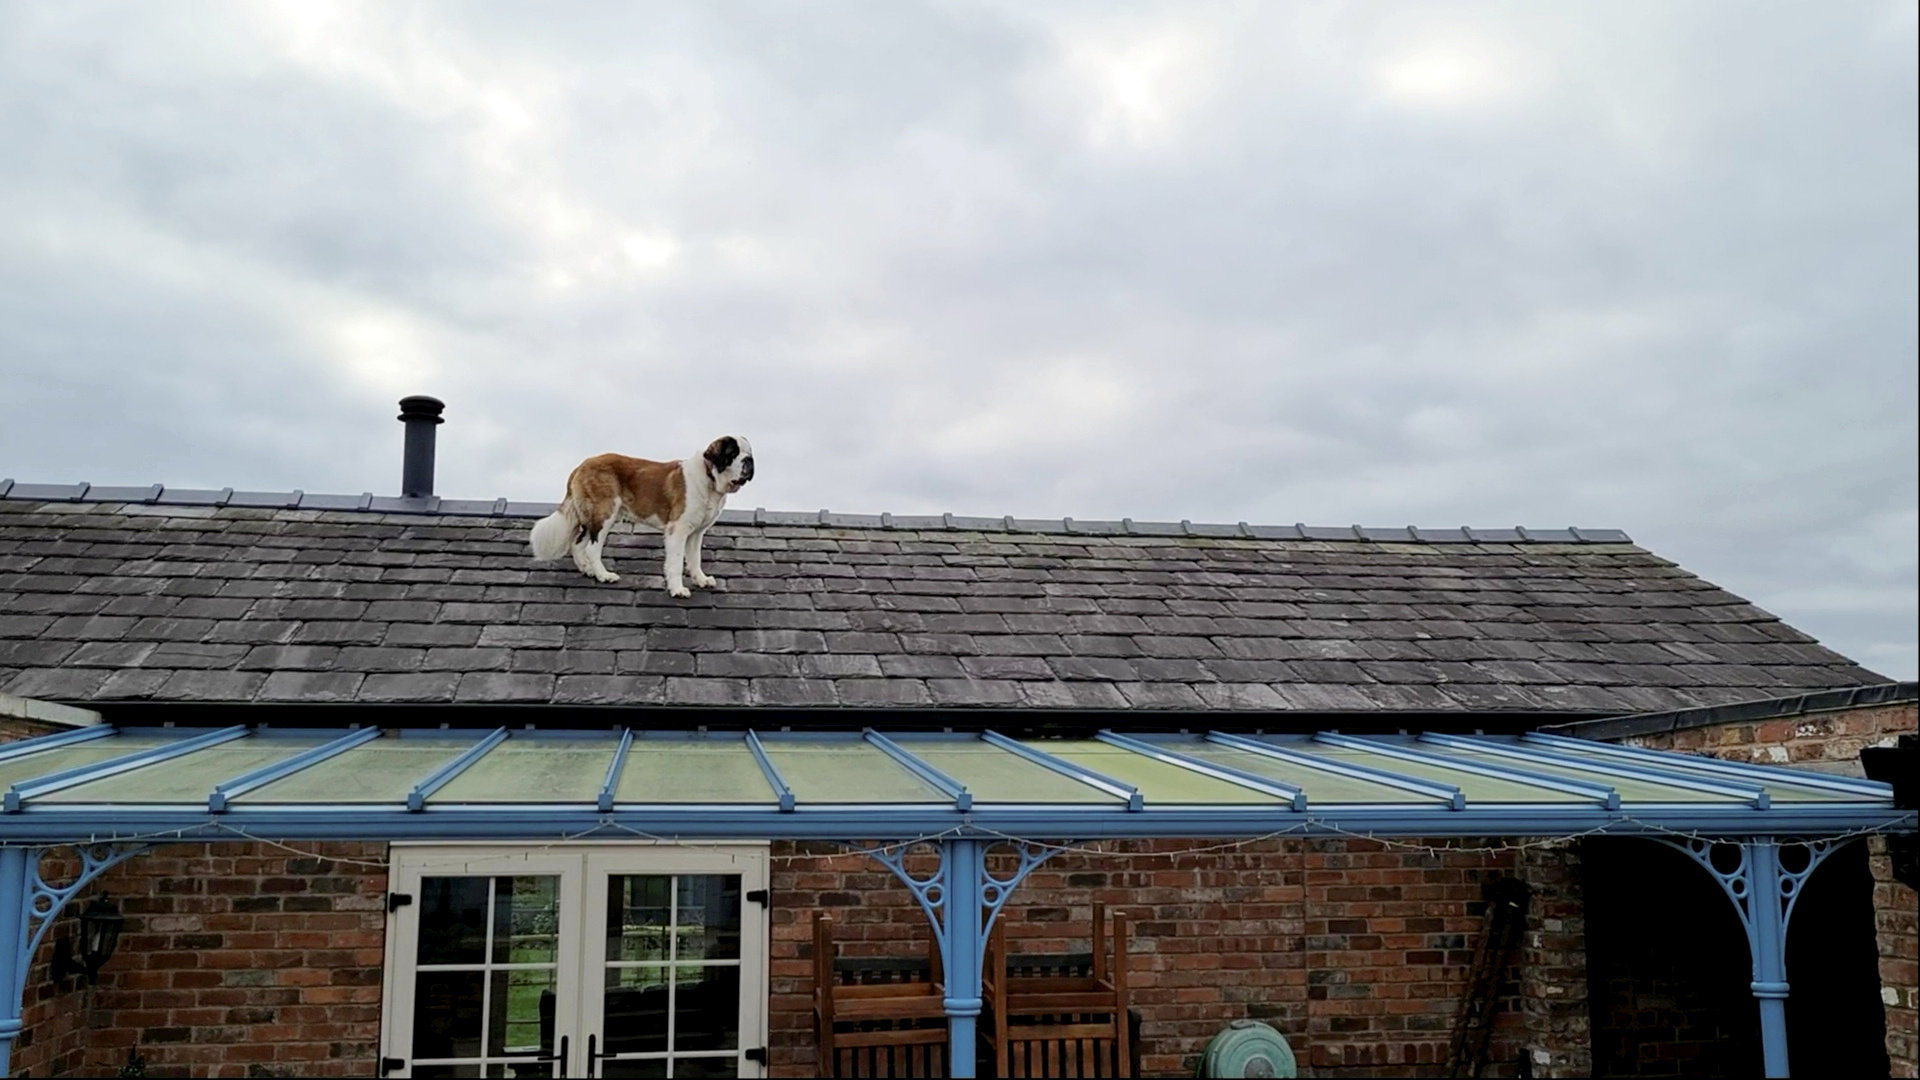 Sampson the St Bernard managed to get himself stranded on the roof